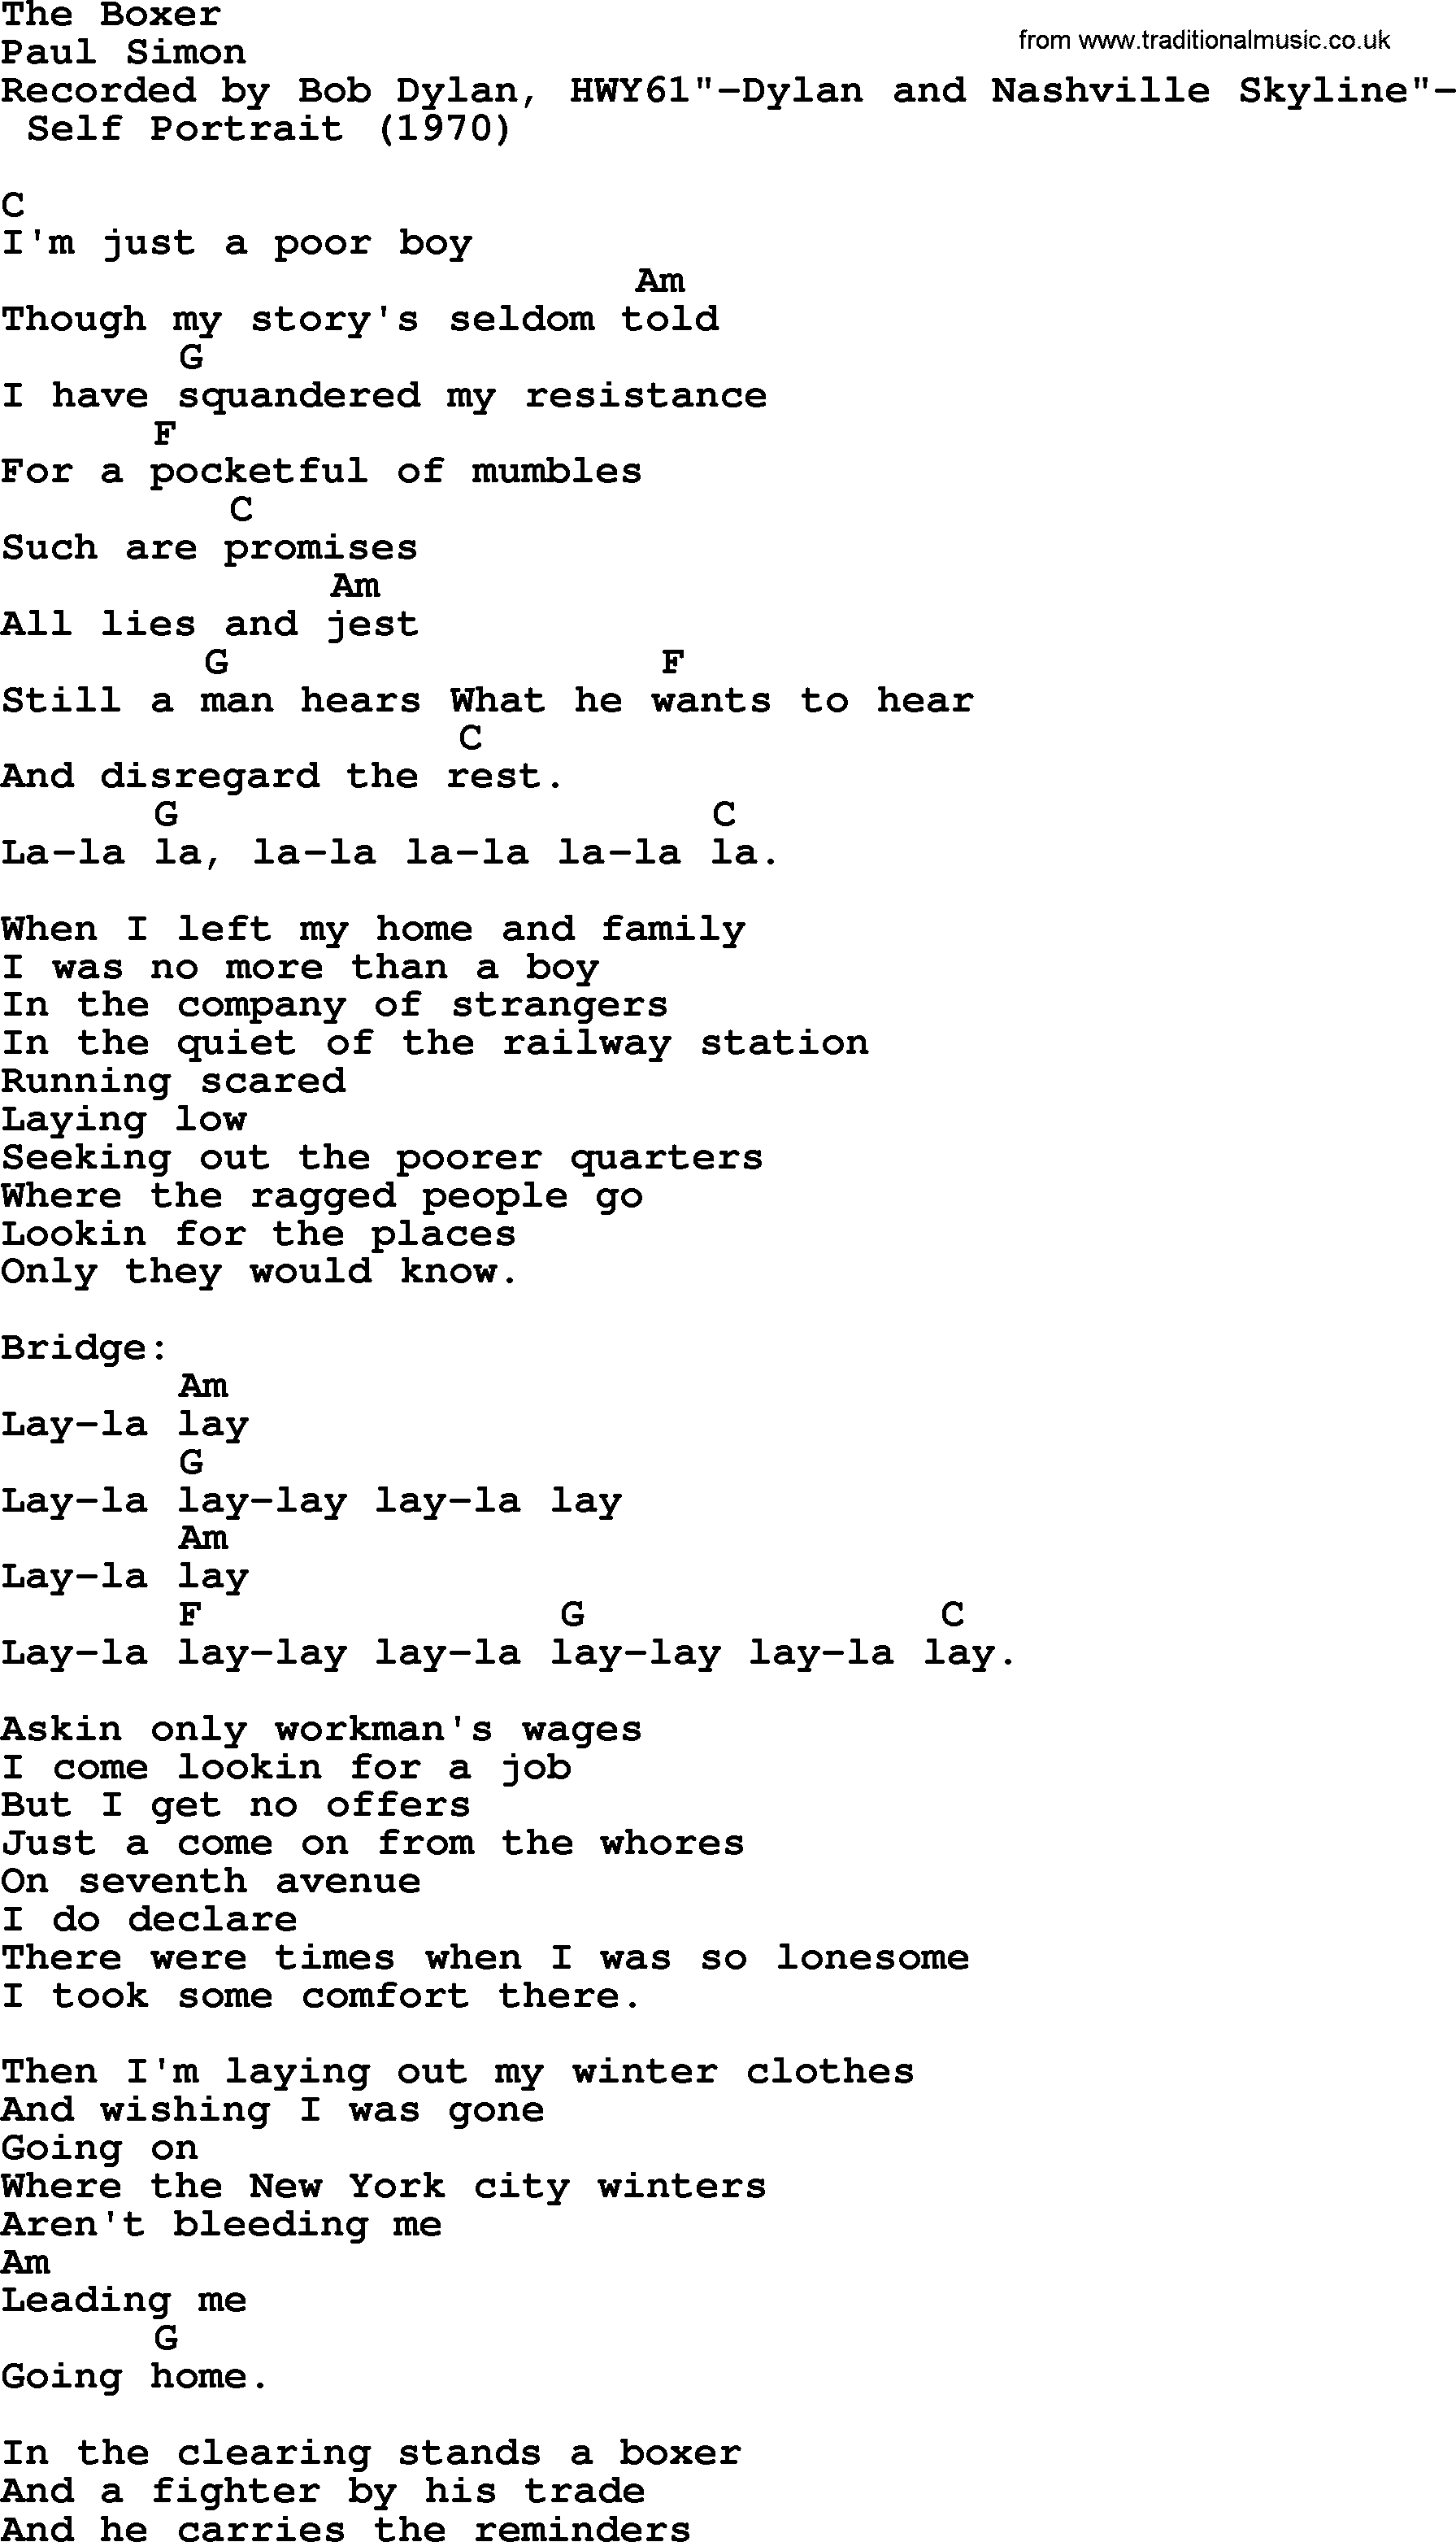 Bob Dylan song, lyrics with chords - The Boxer